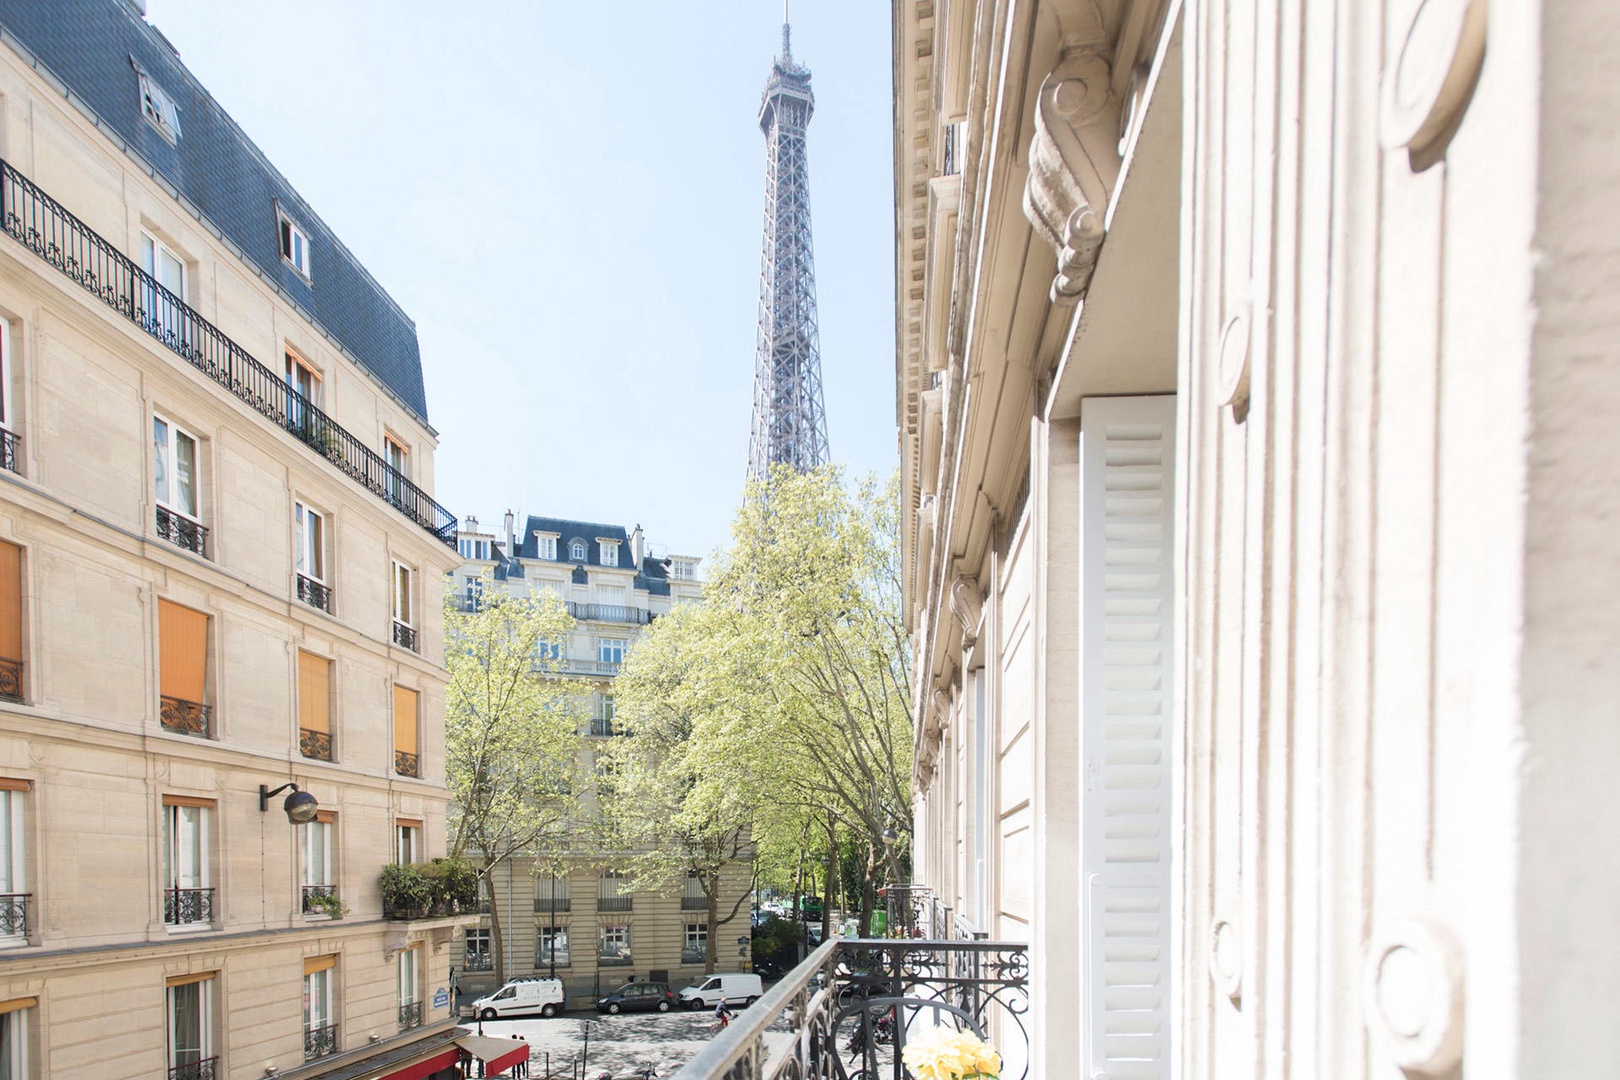 The balcony overlooks Paris streets and the beautiful Eiffel Tower.